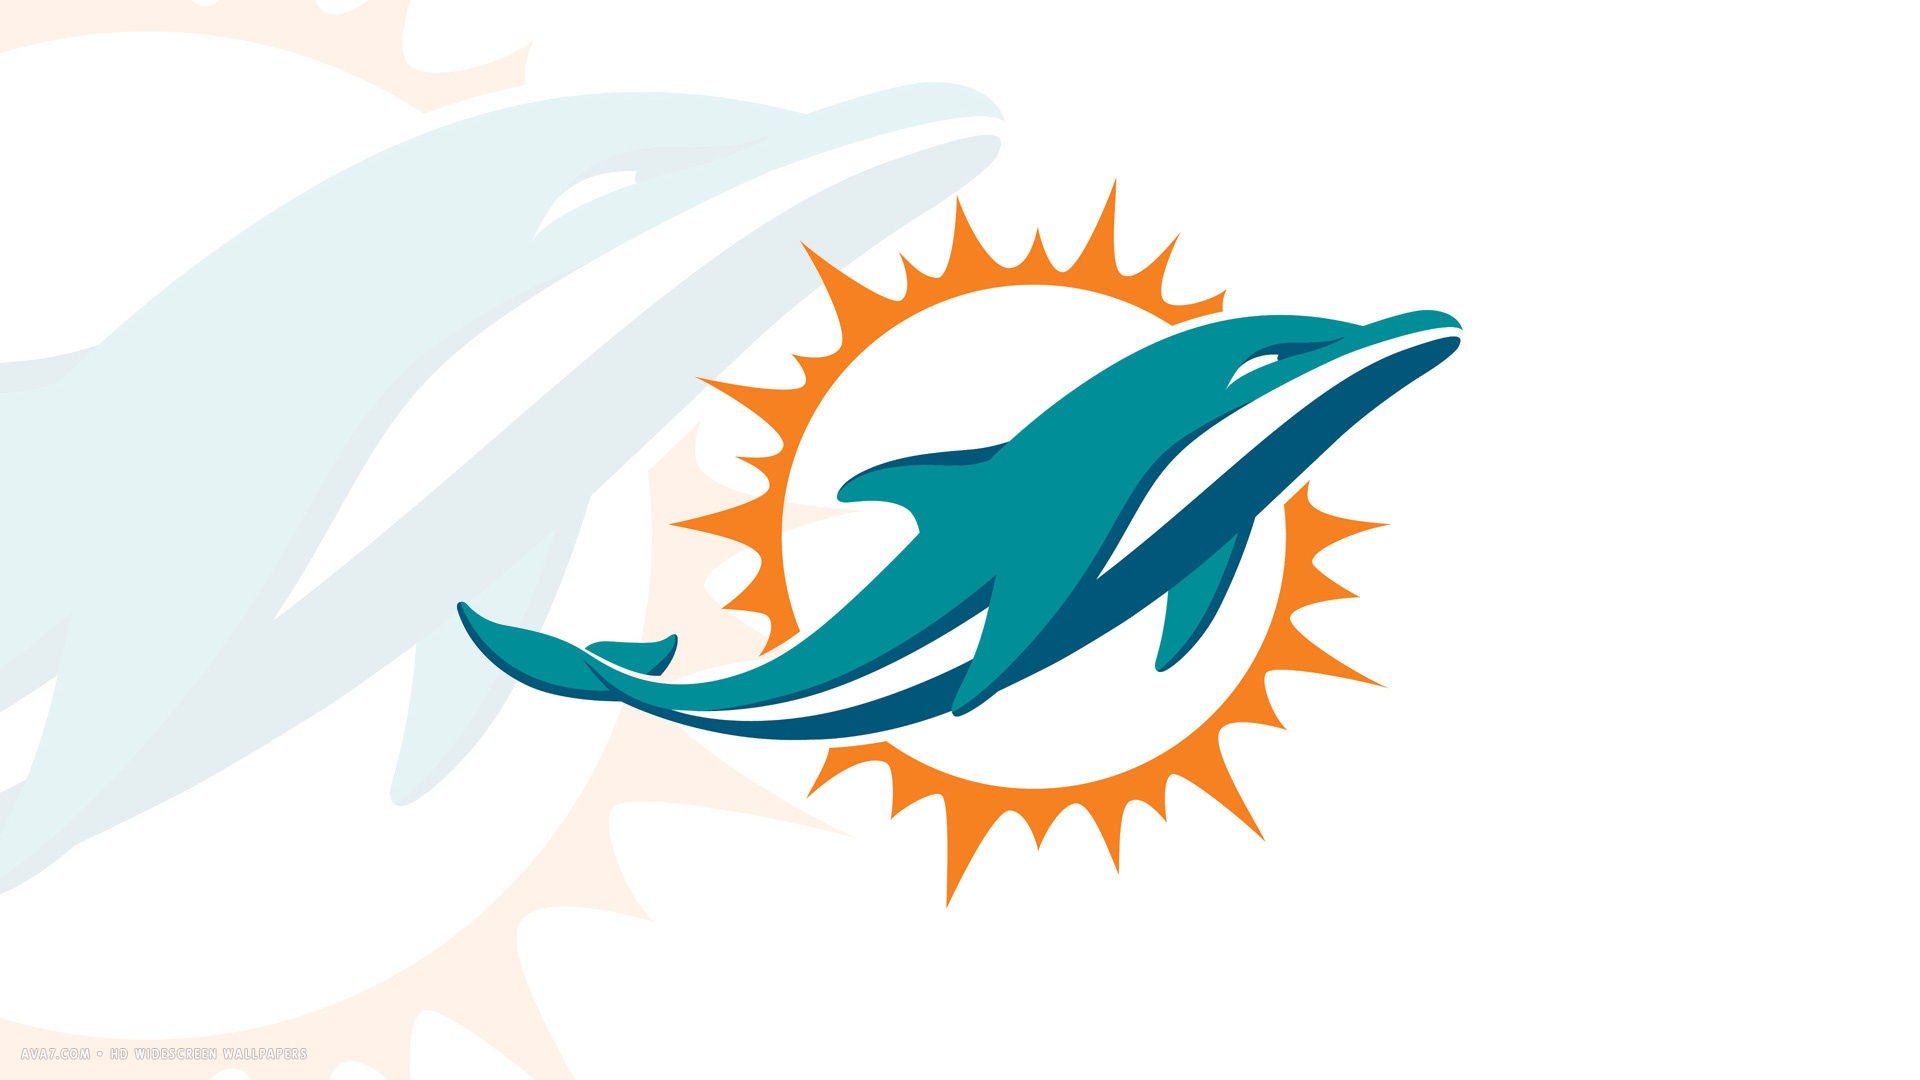 Miami Dolphins Wallpaper For Mac Backgrounds With Resolution 1920X1080 pixel. You can make this wallpaper for your Mac or Windows Desktop Background, iPhone, Android or Tablet and another Smartphone device for free